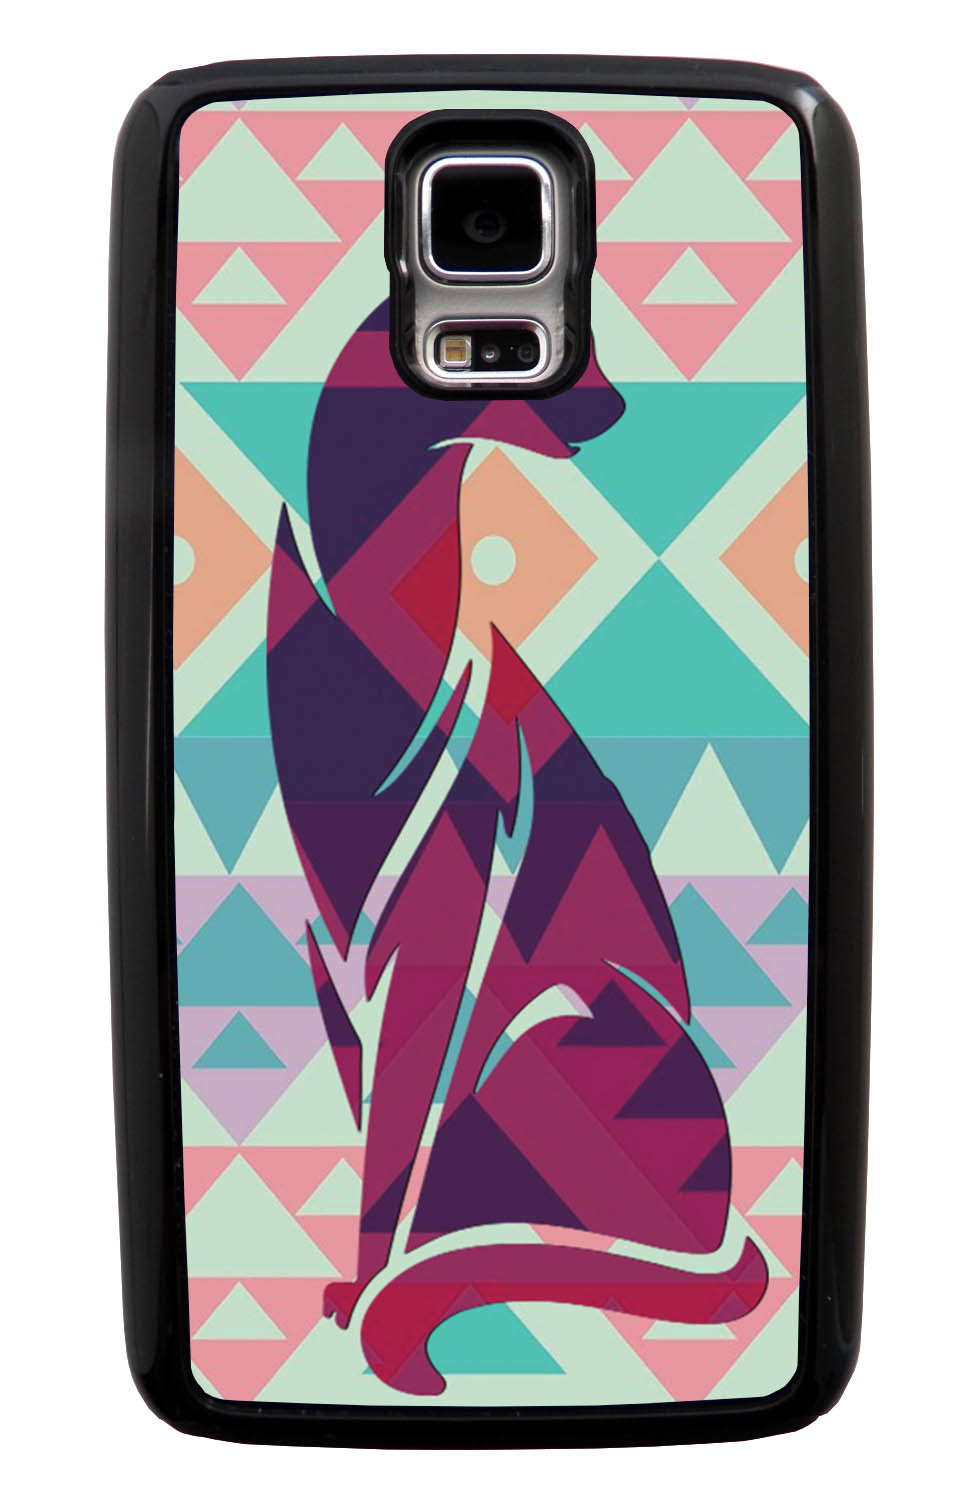 Samsung Galaxy S5 / SV Cat Case - Pastel Colored Sitting Cat on Pale Green